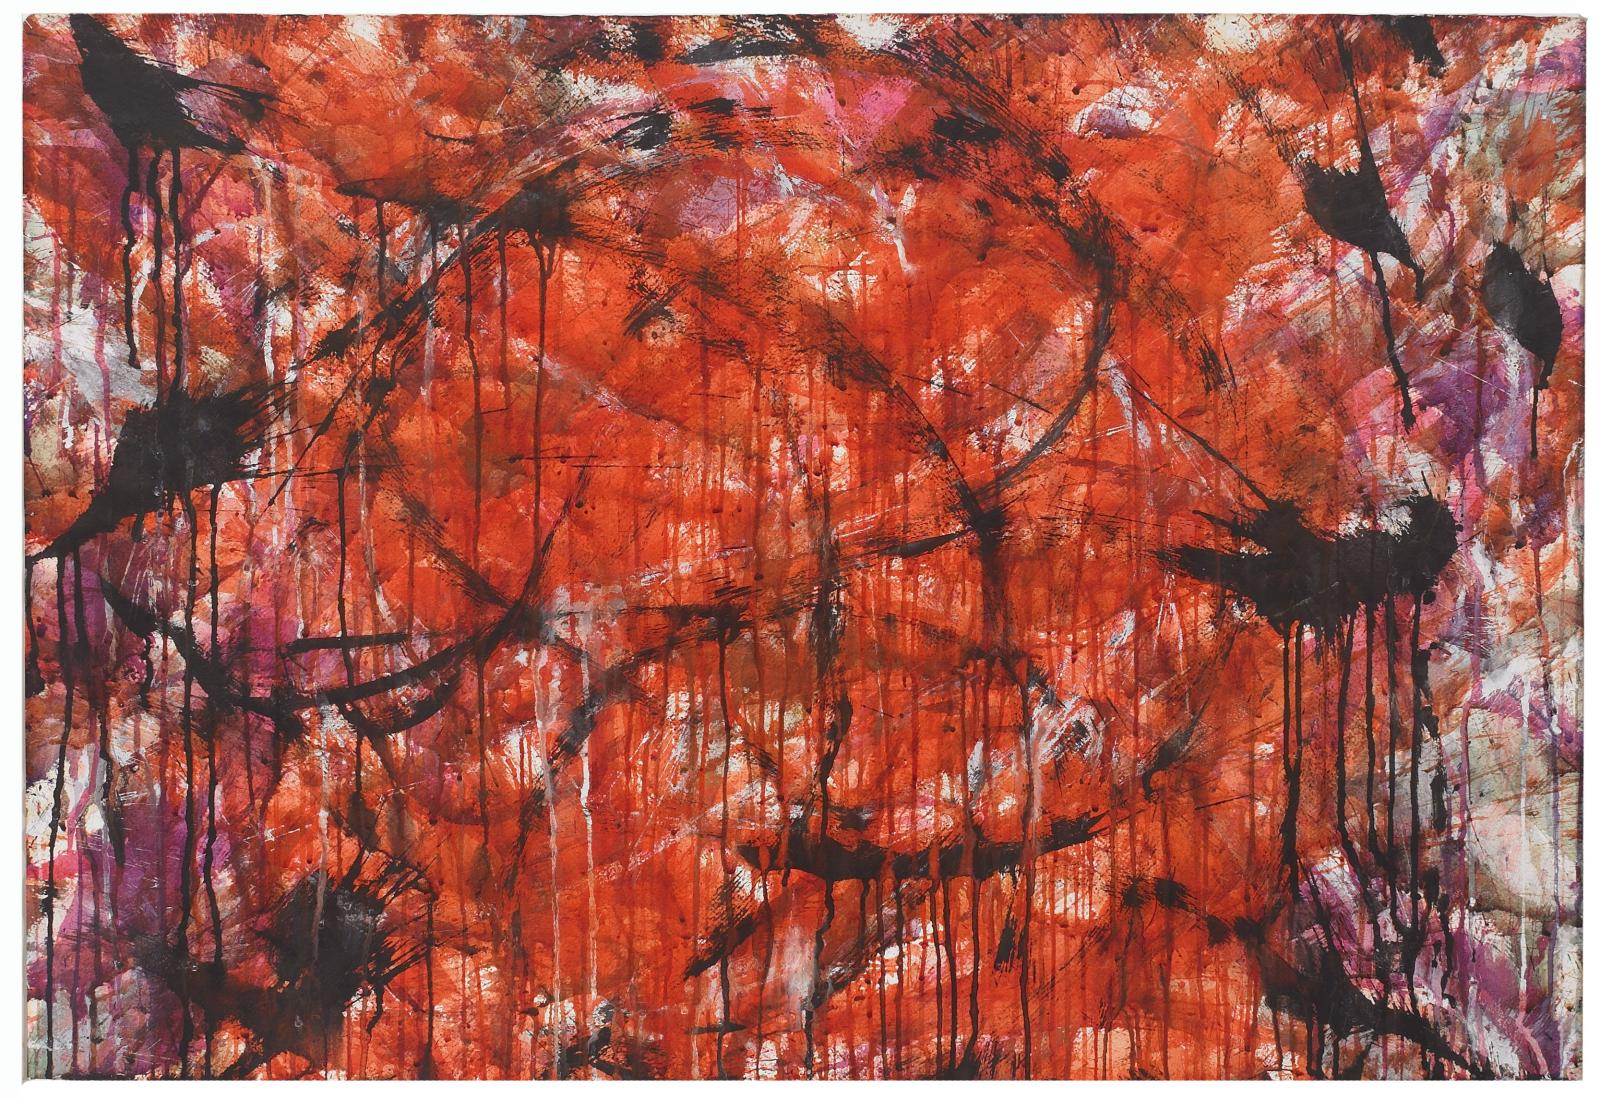 Norman Bluhm, Untitled, 1957